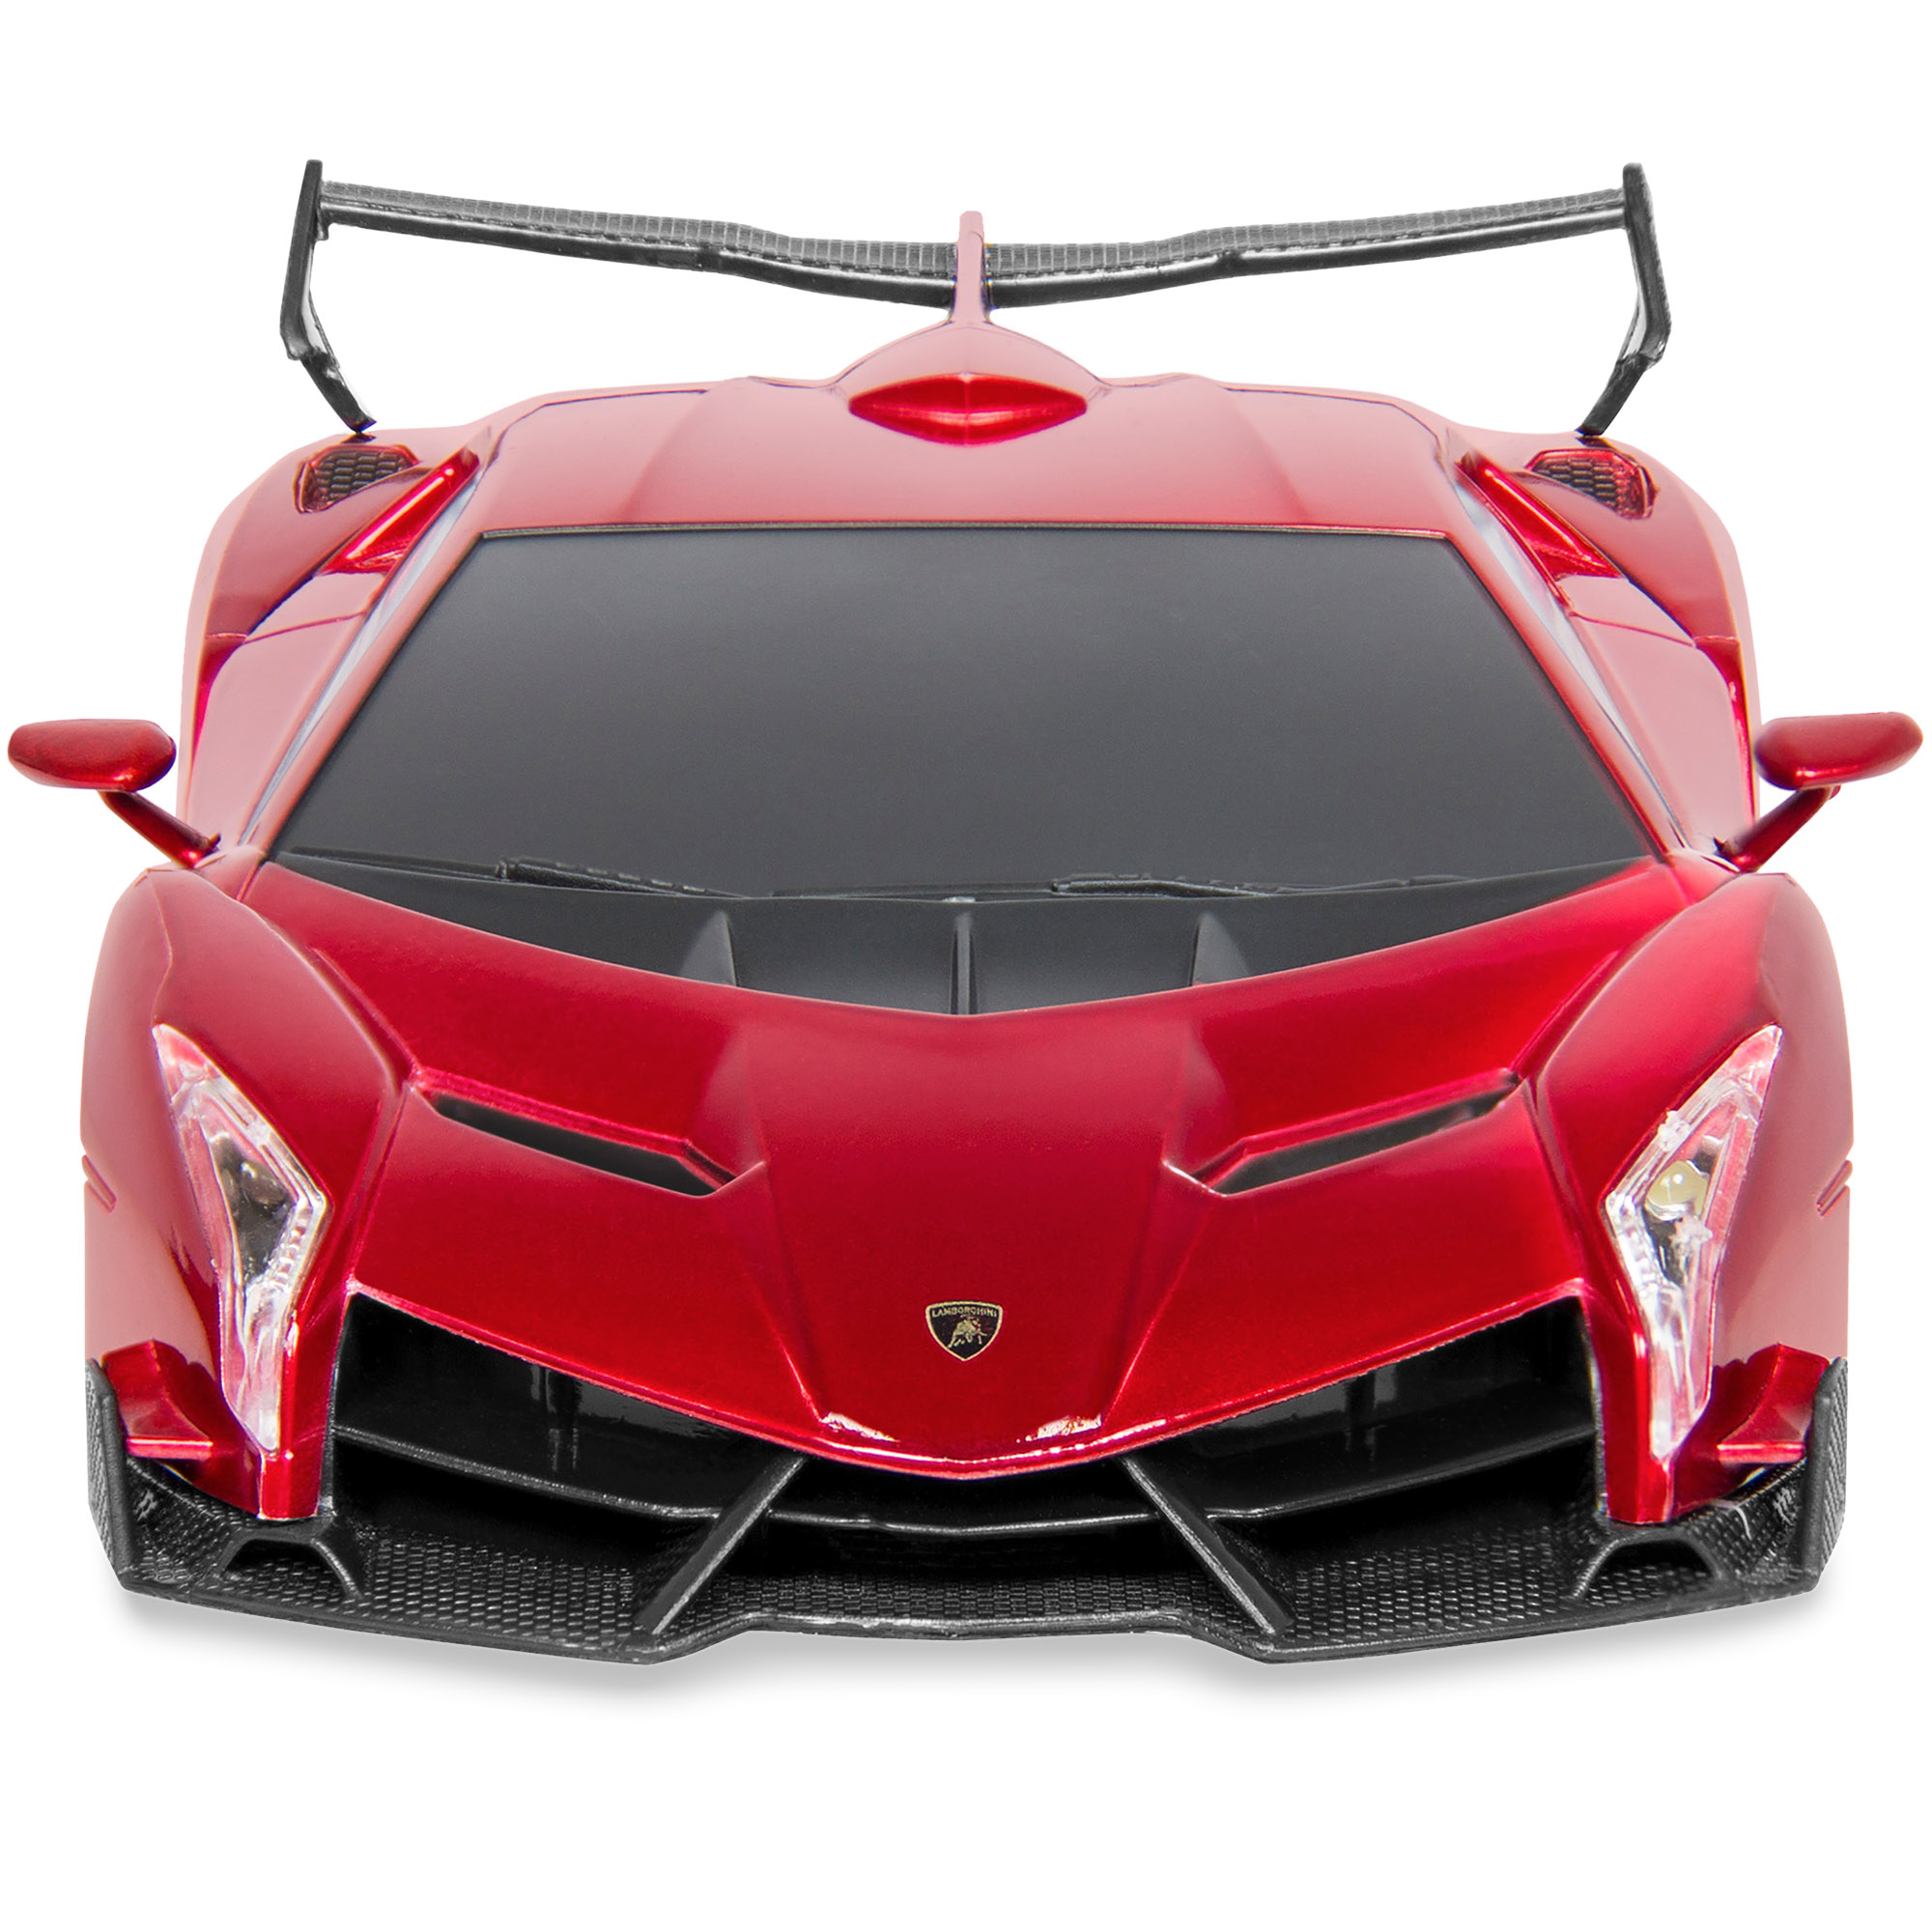 Best Choice Products 1/24 Officially Licensed RC Lamborghini Veneno Sport Racing Car w/ 2.4GHz Remote Control - Red - image 4 of 6